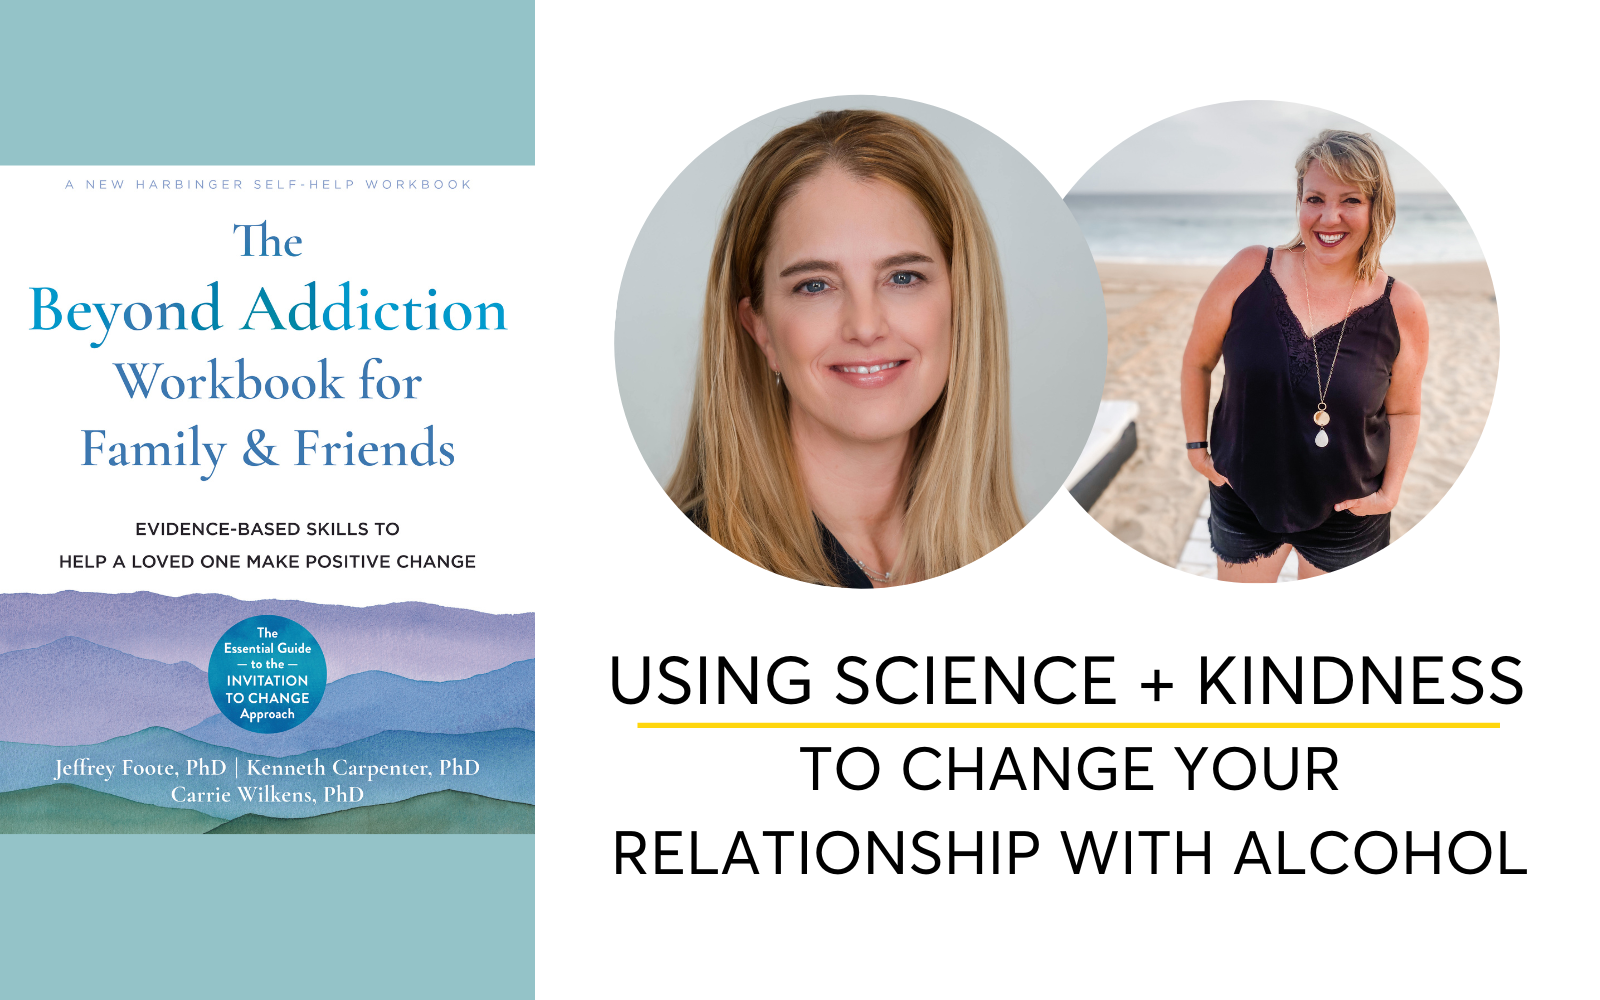 Using Science + Kindness To Change Your Relationship with Alcohol